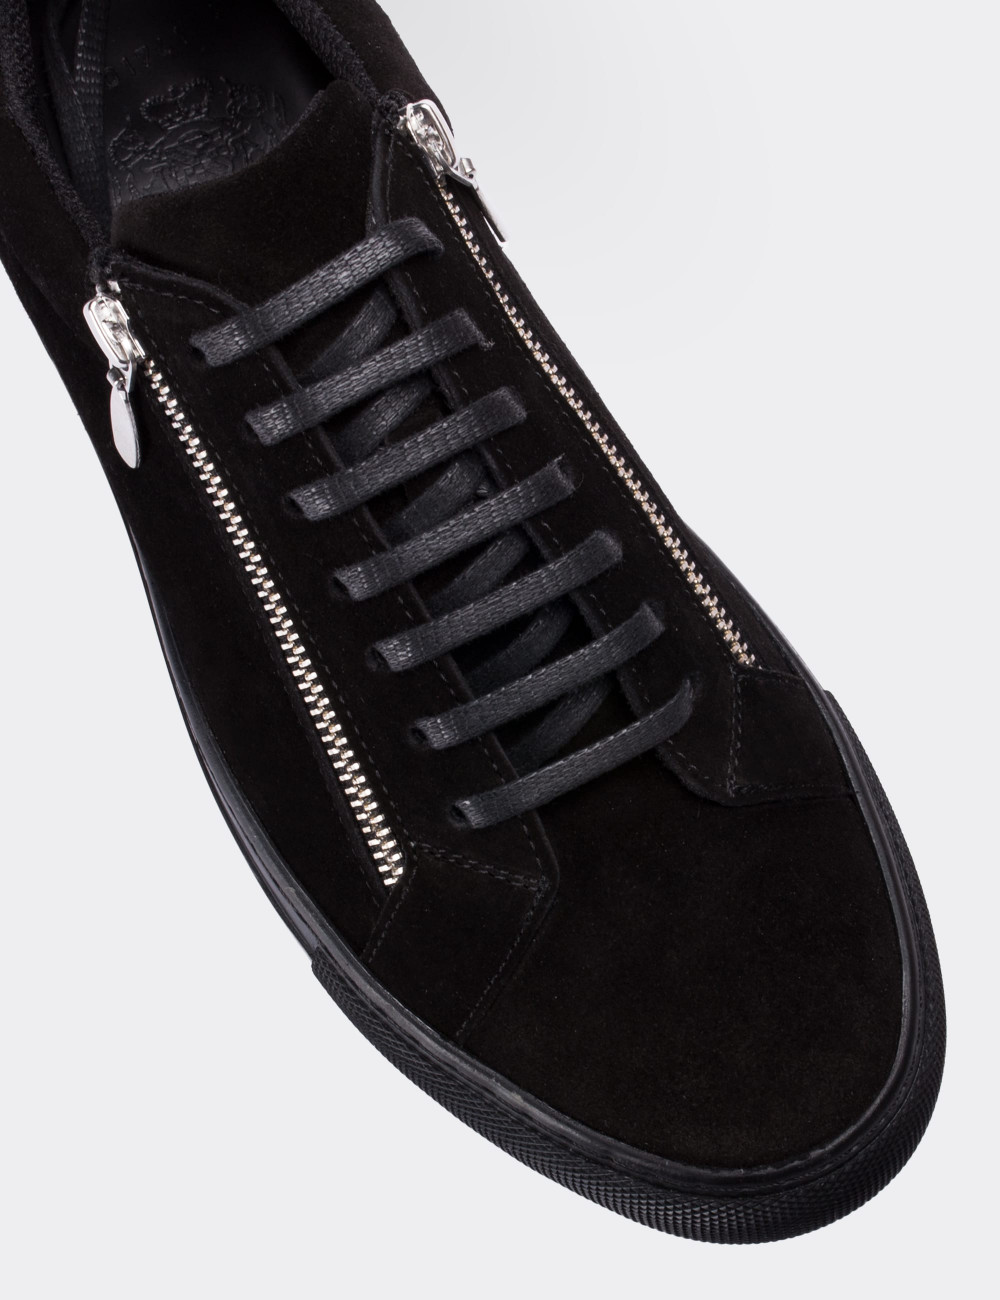 Black Suede Leather Sneakers - 01741MSYHC01